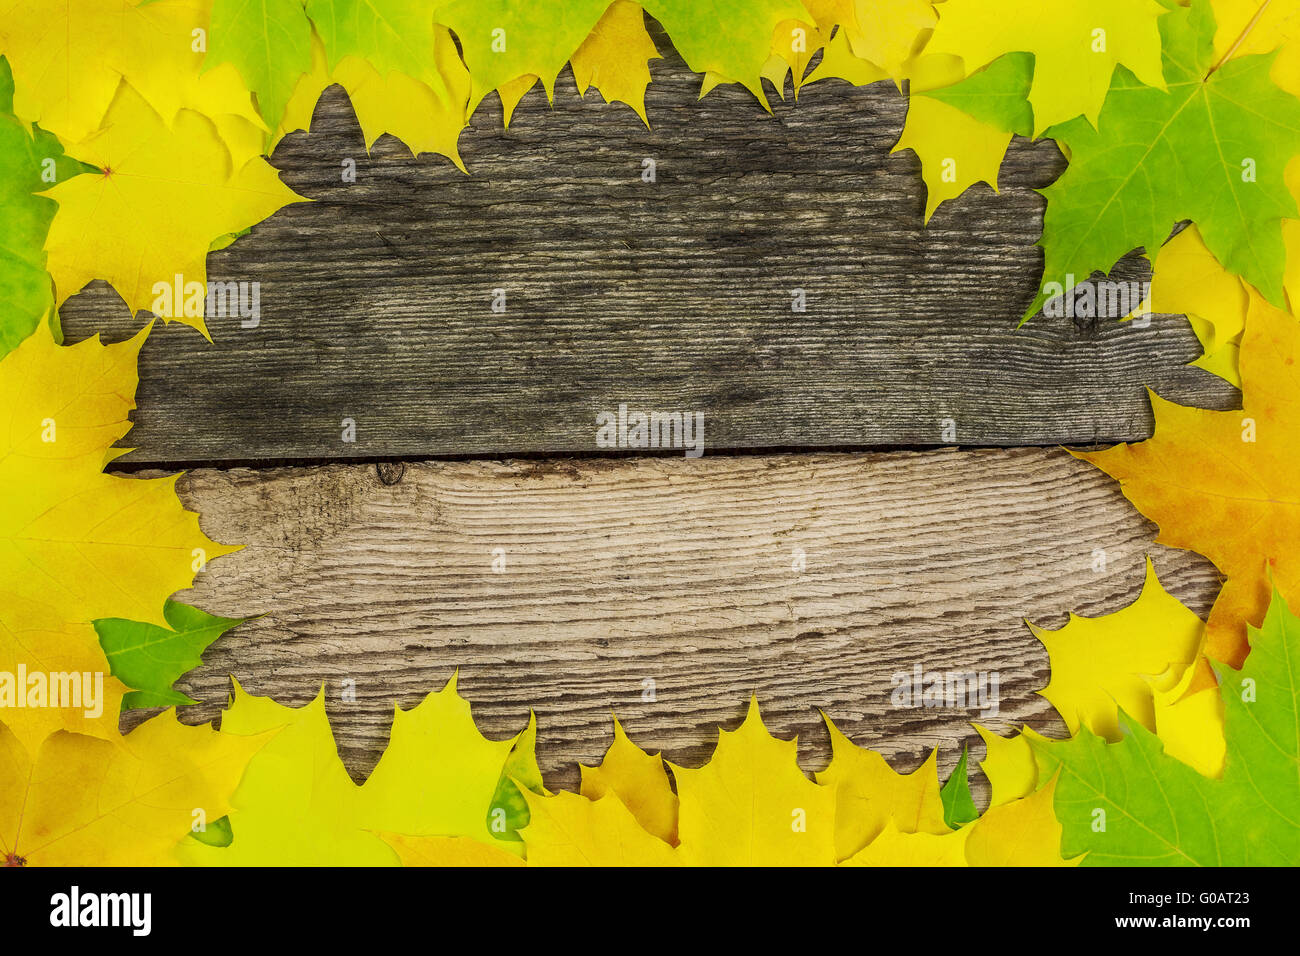 Autumn maple leaf on old boards Stock Photo